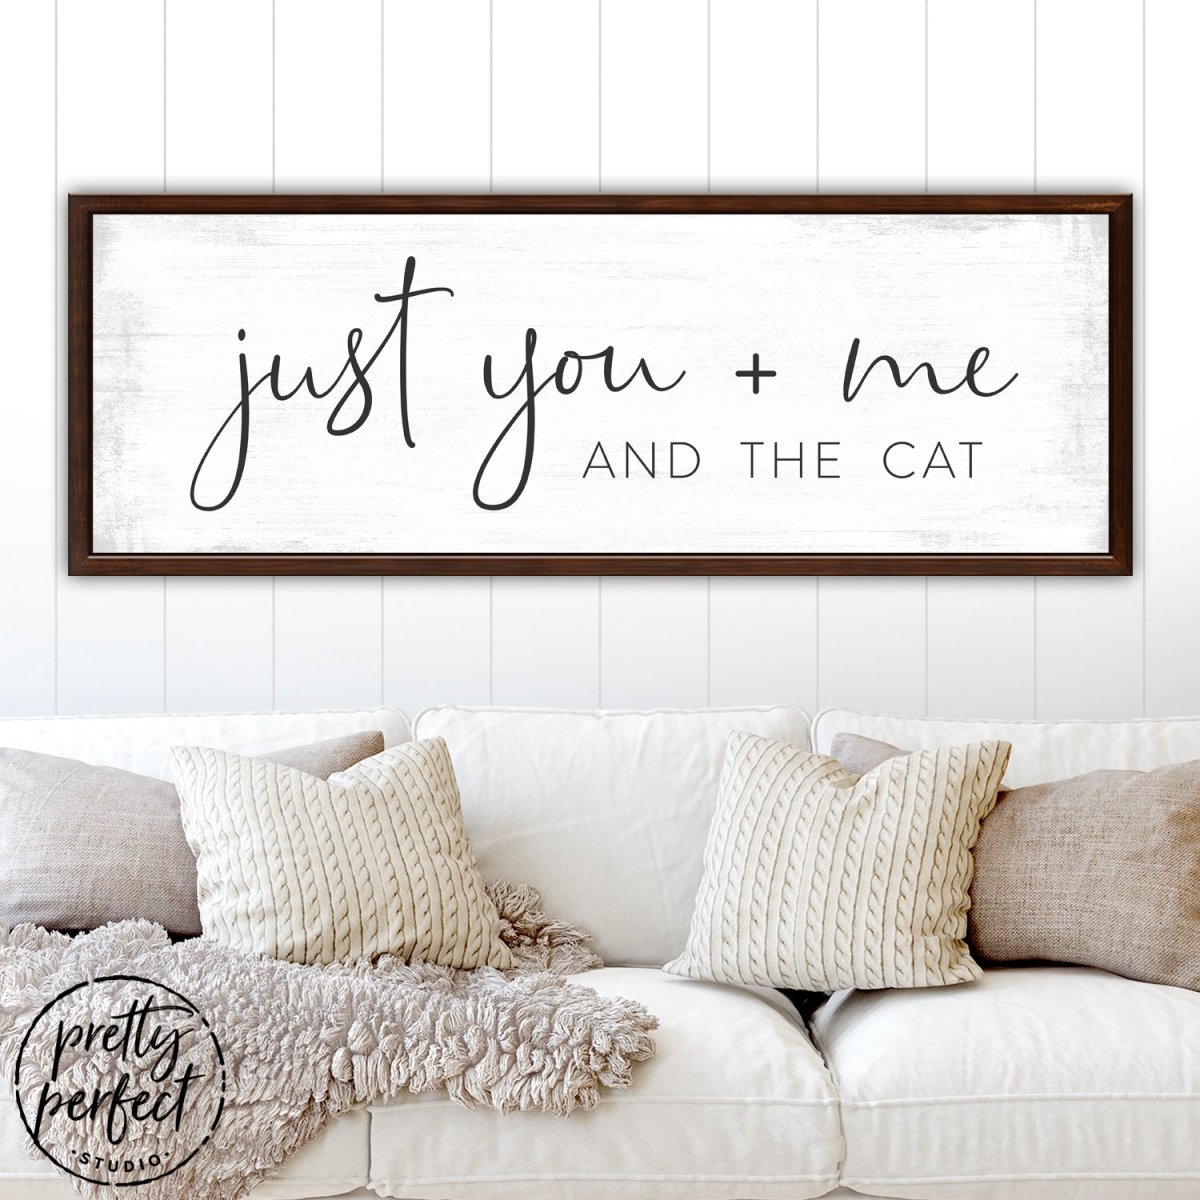 Just You Me And The Cat Sign Above Couch - Pretty Perfect Studio